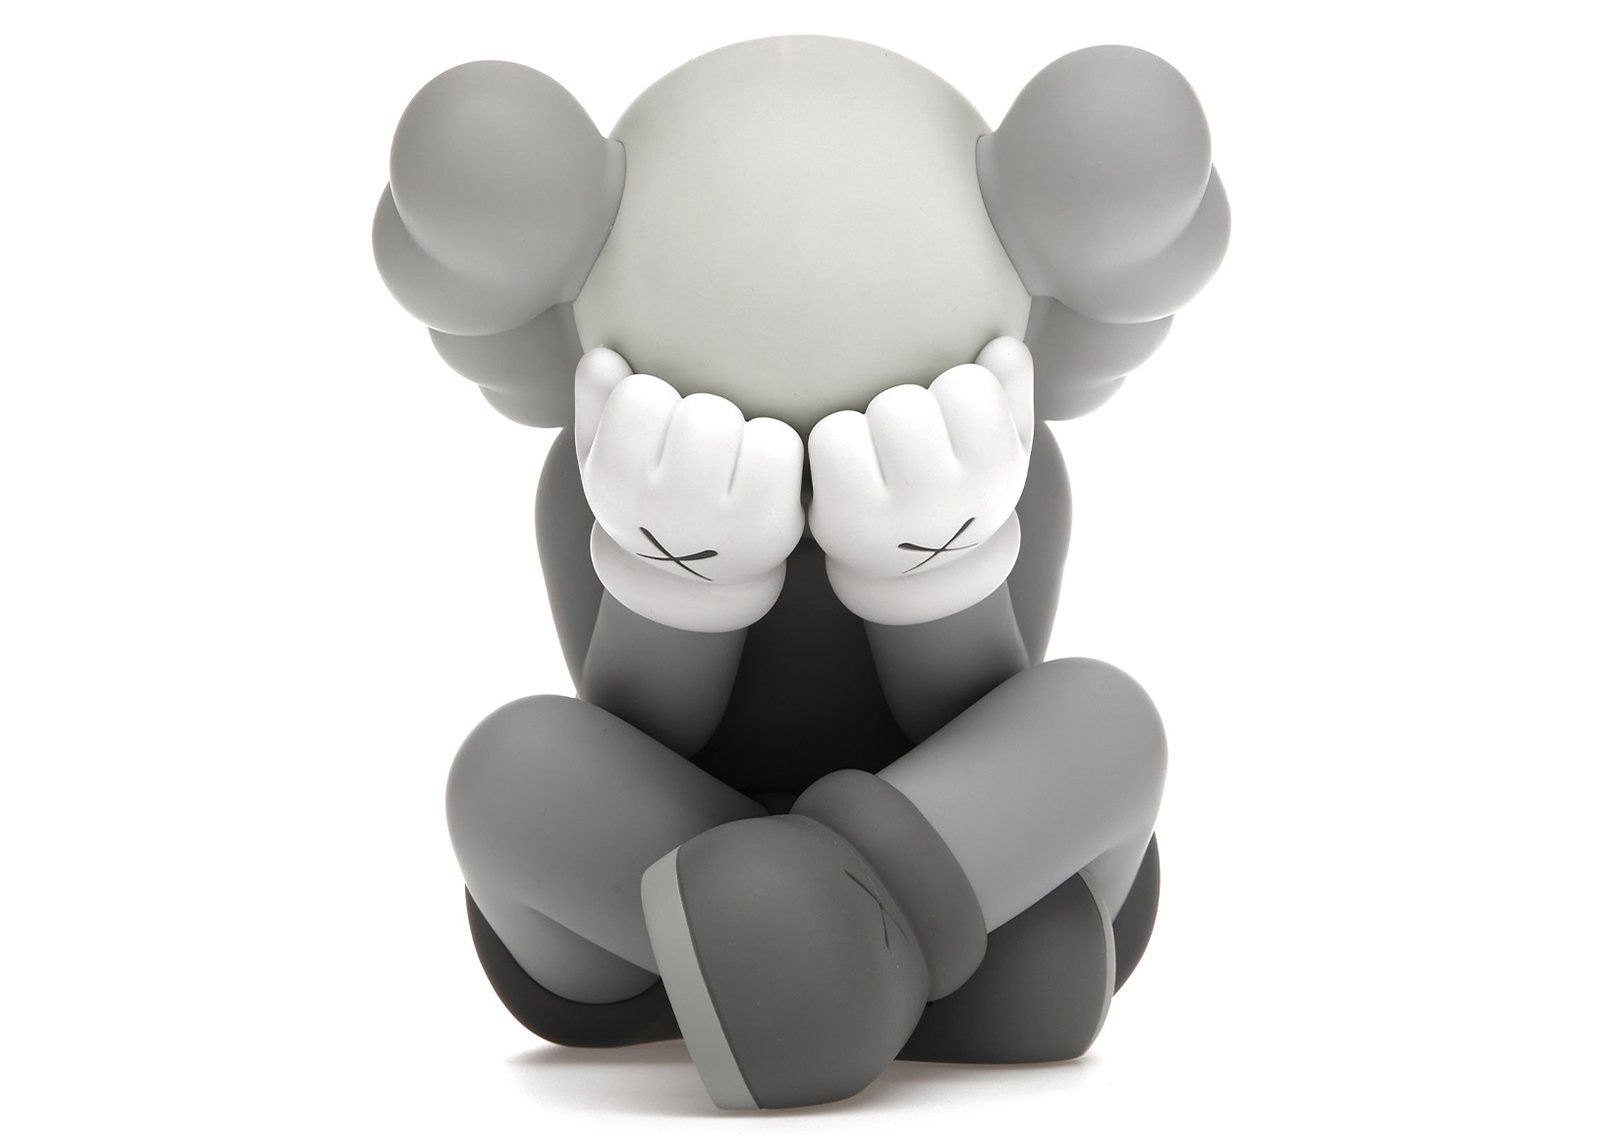 Details about   KAWS HOLIDAY Companion Vinyl Figure Grey 